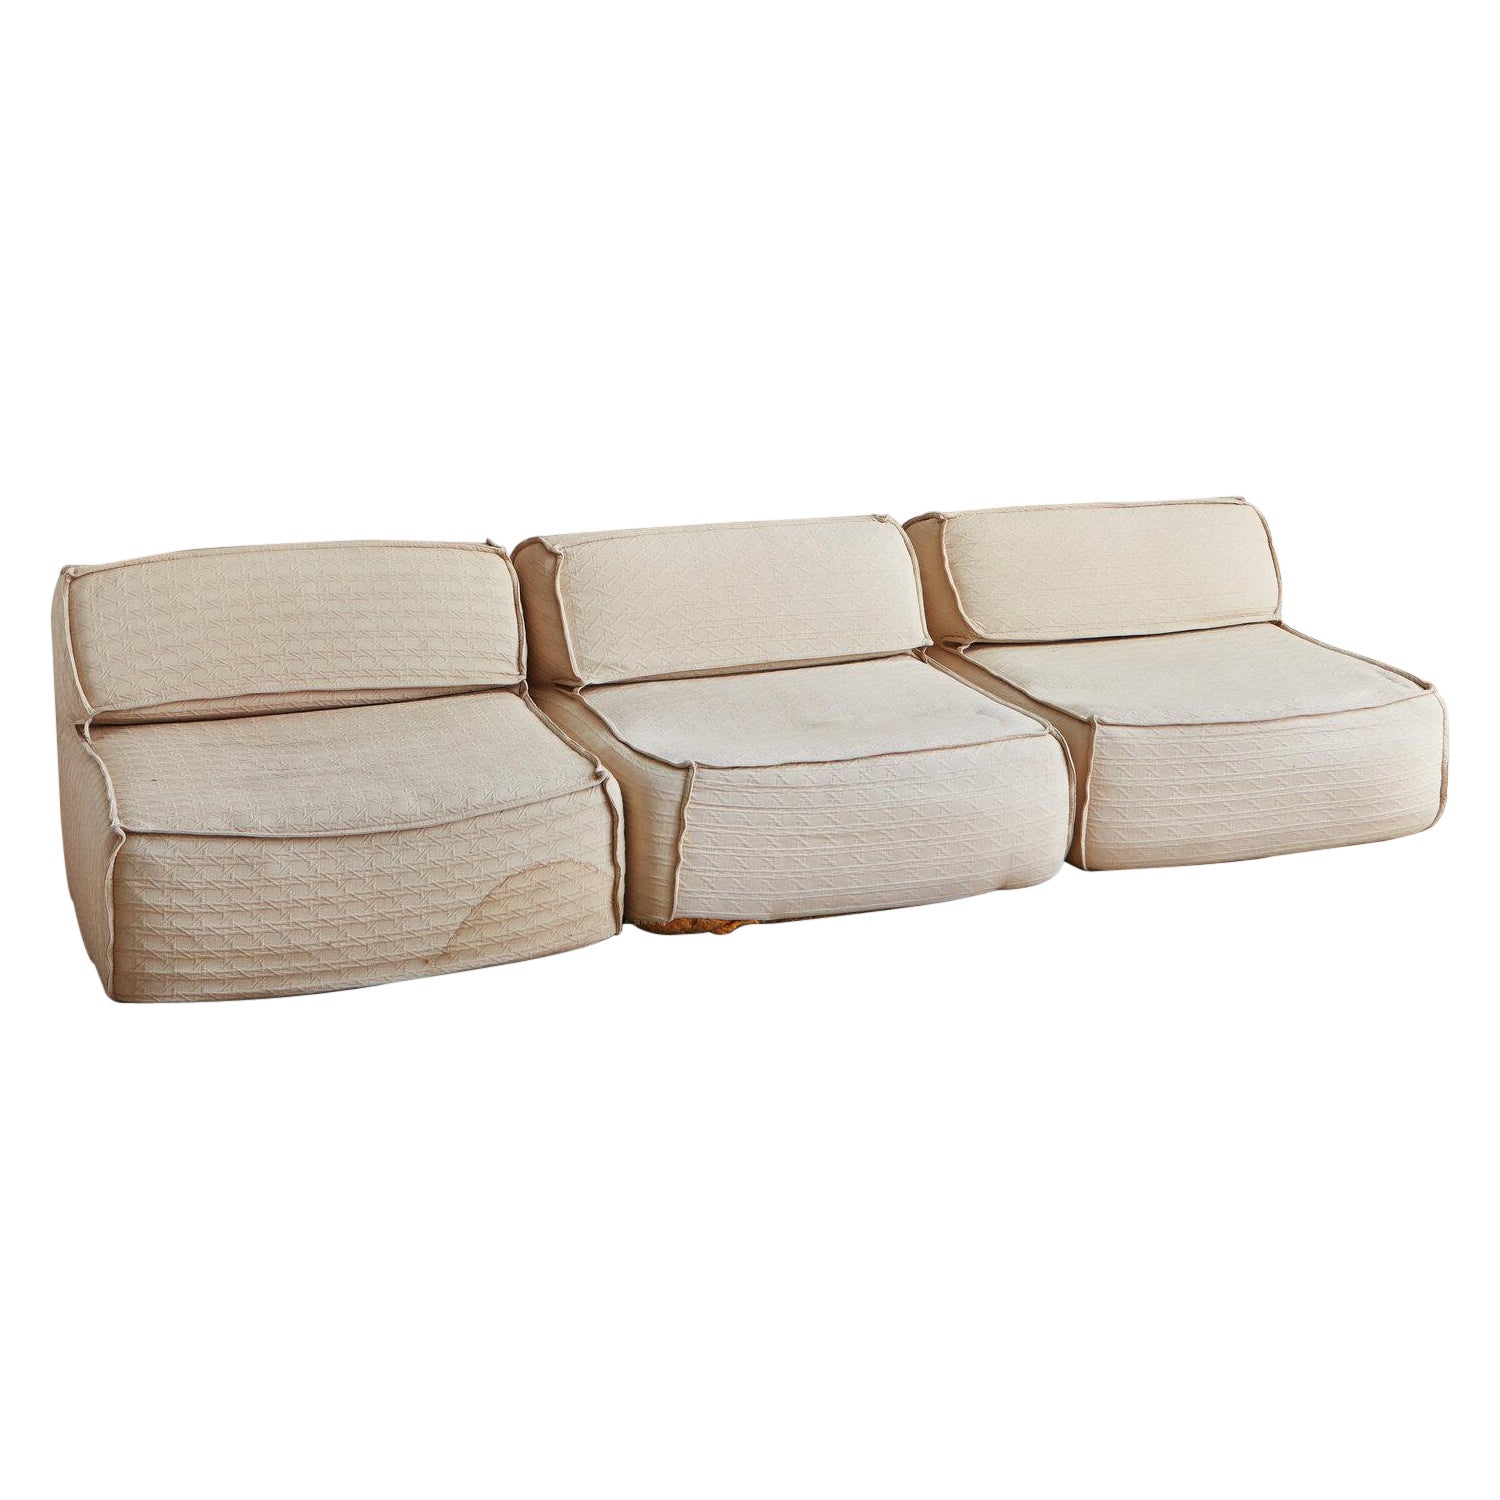 Vintage European Sectional Sofa Attributed to Roche Bobois, 1980s